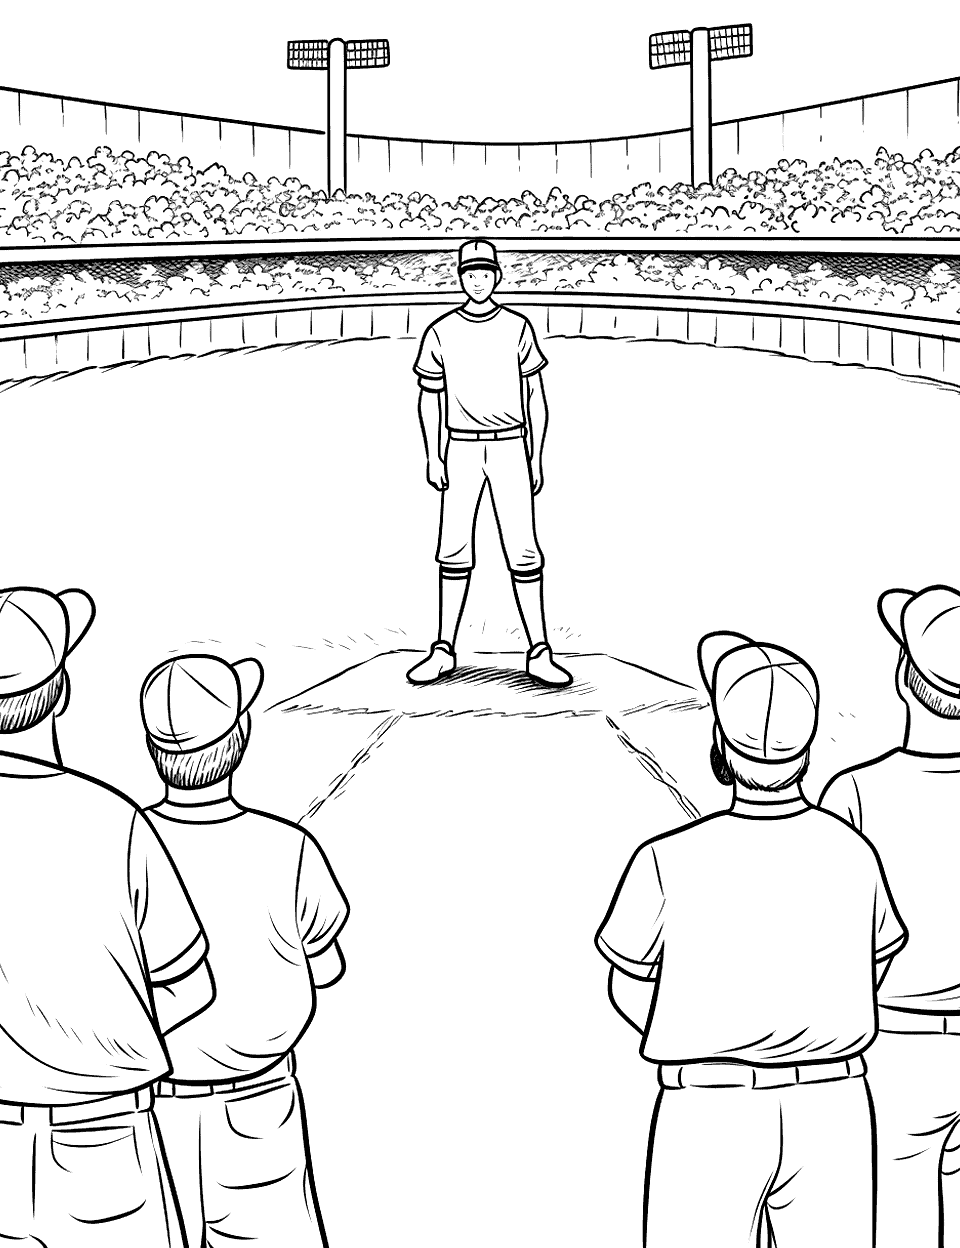 Umpire's Call Baseball Coloring Page - An umpire making a decisive call at home plate, with players eagerly awaiting the decision.